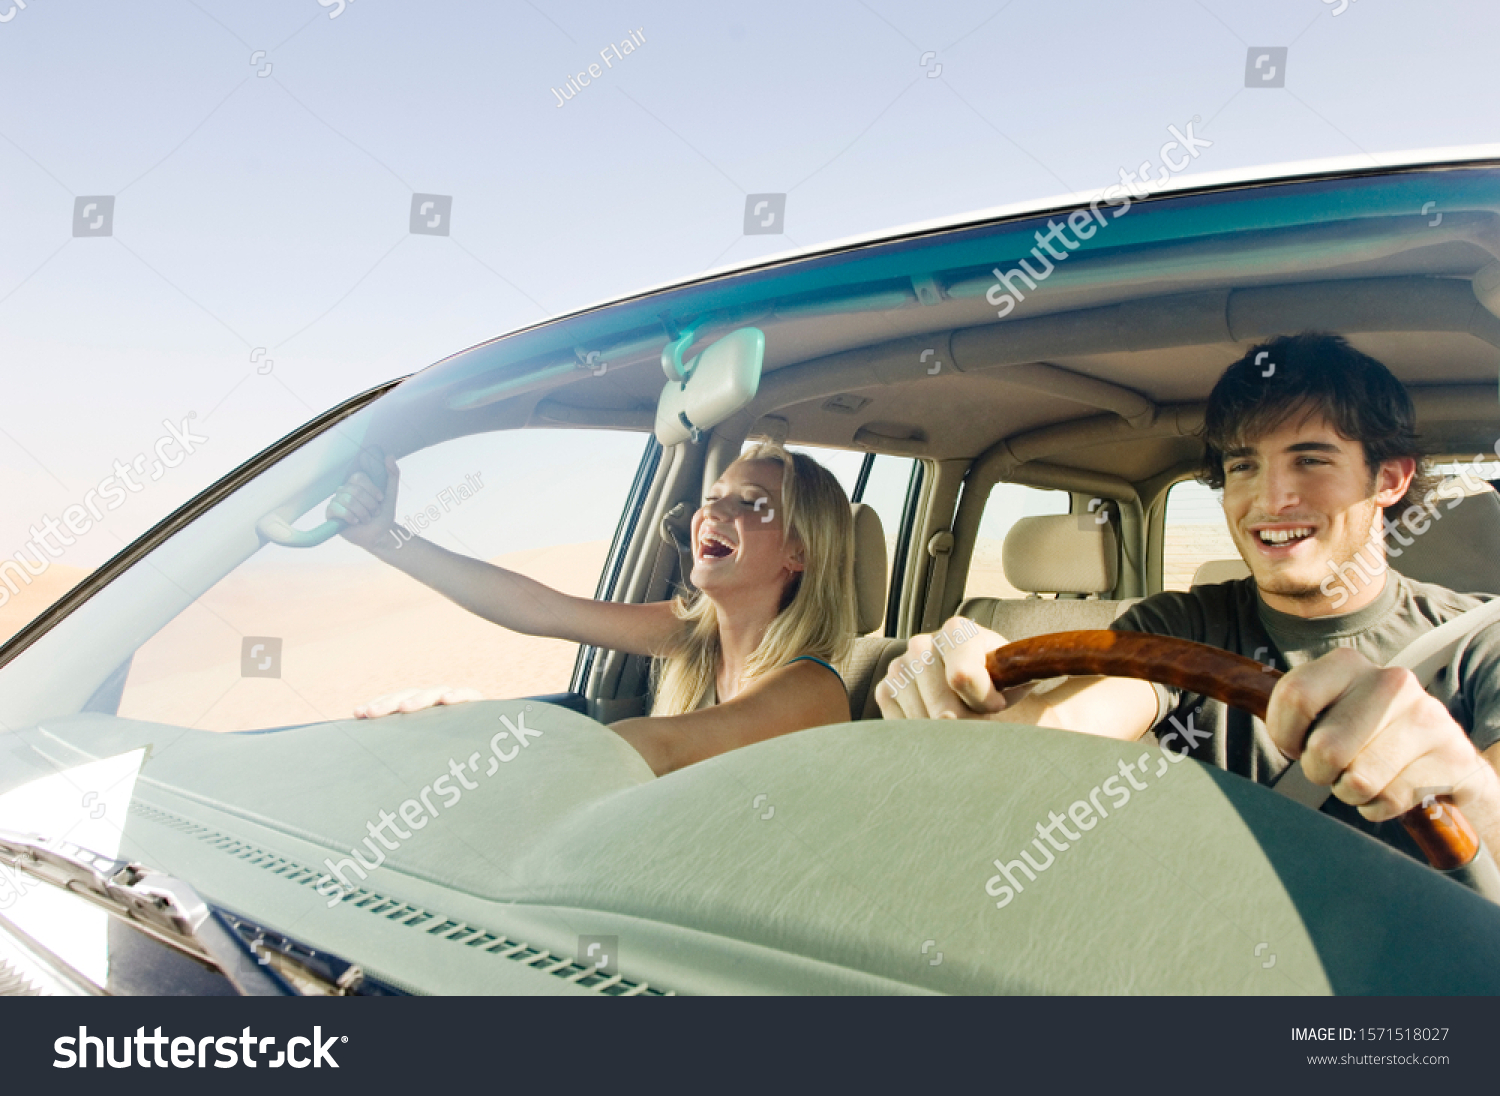 A young couple in a car #1571518027